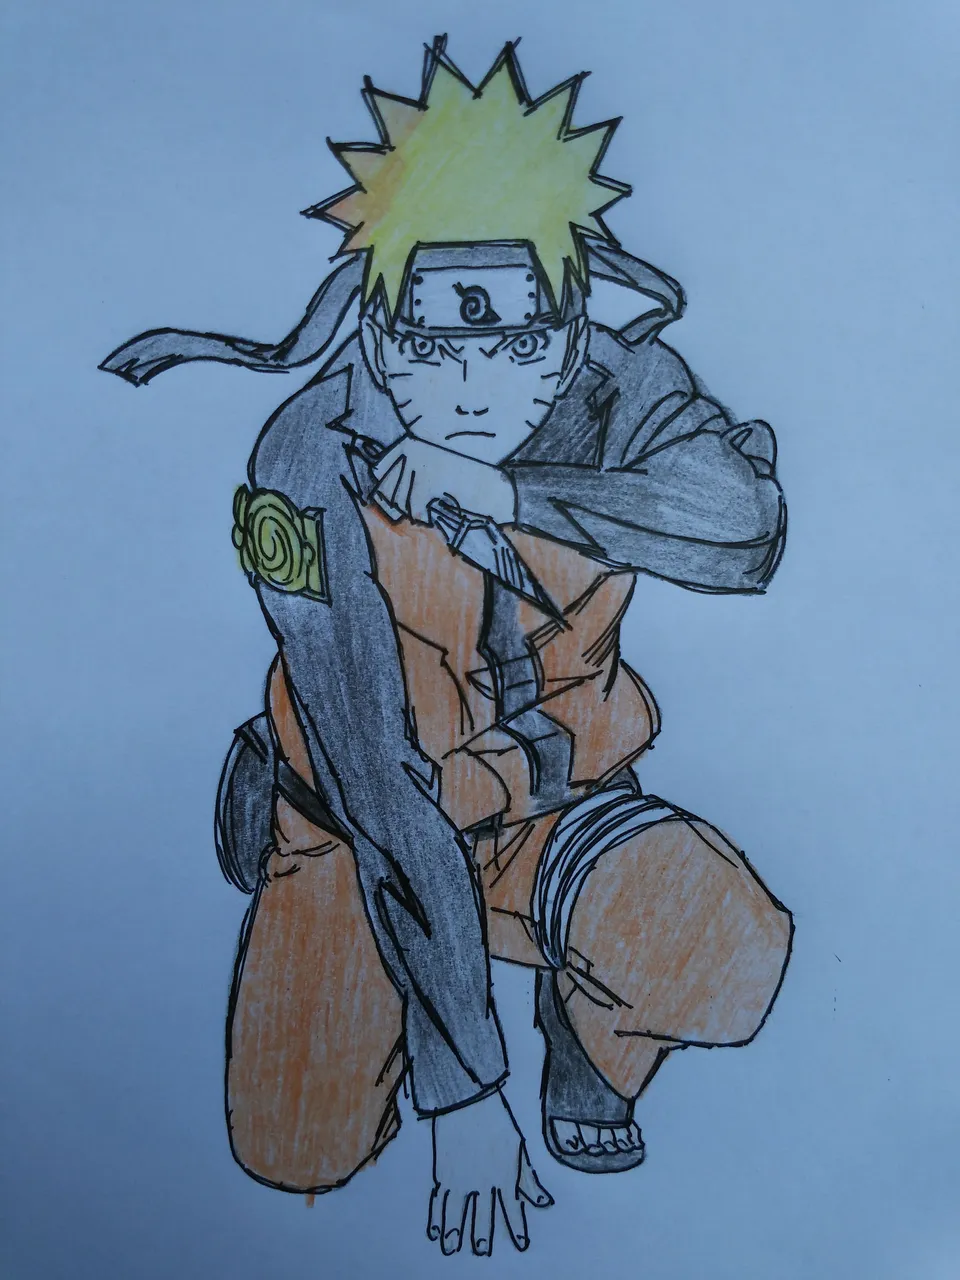 A Naruto drawing that I made earlier today